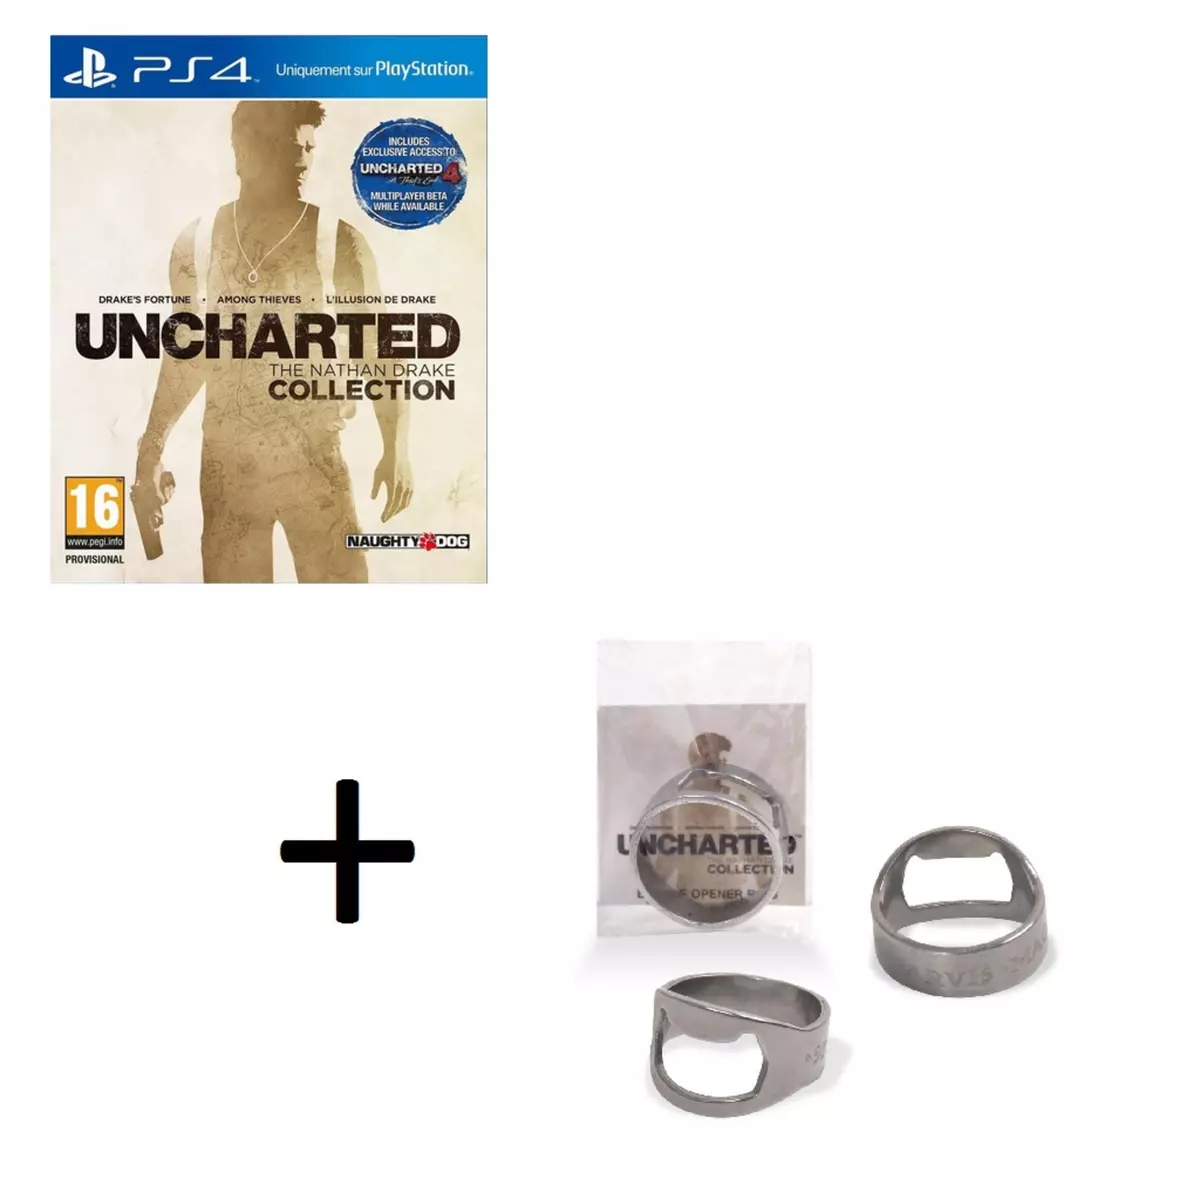 Uncharted : The Nathan Drake Collection PS4 + Bague ouvre-bouteille Uncharted Collection